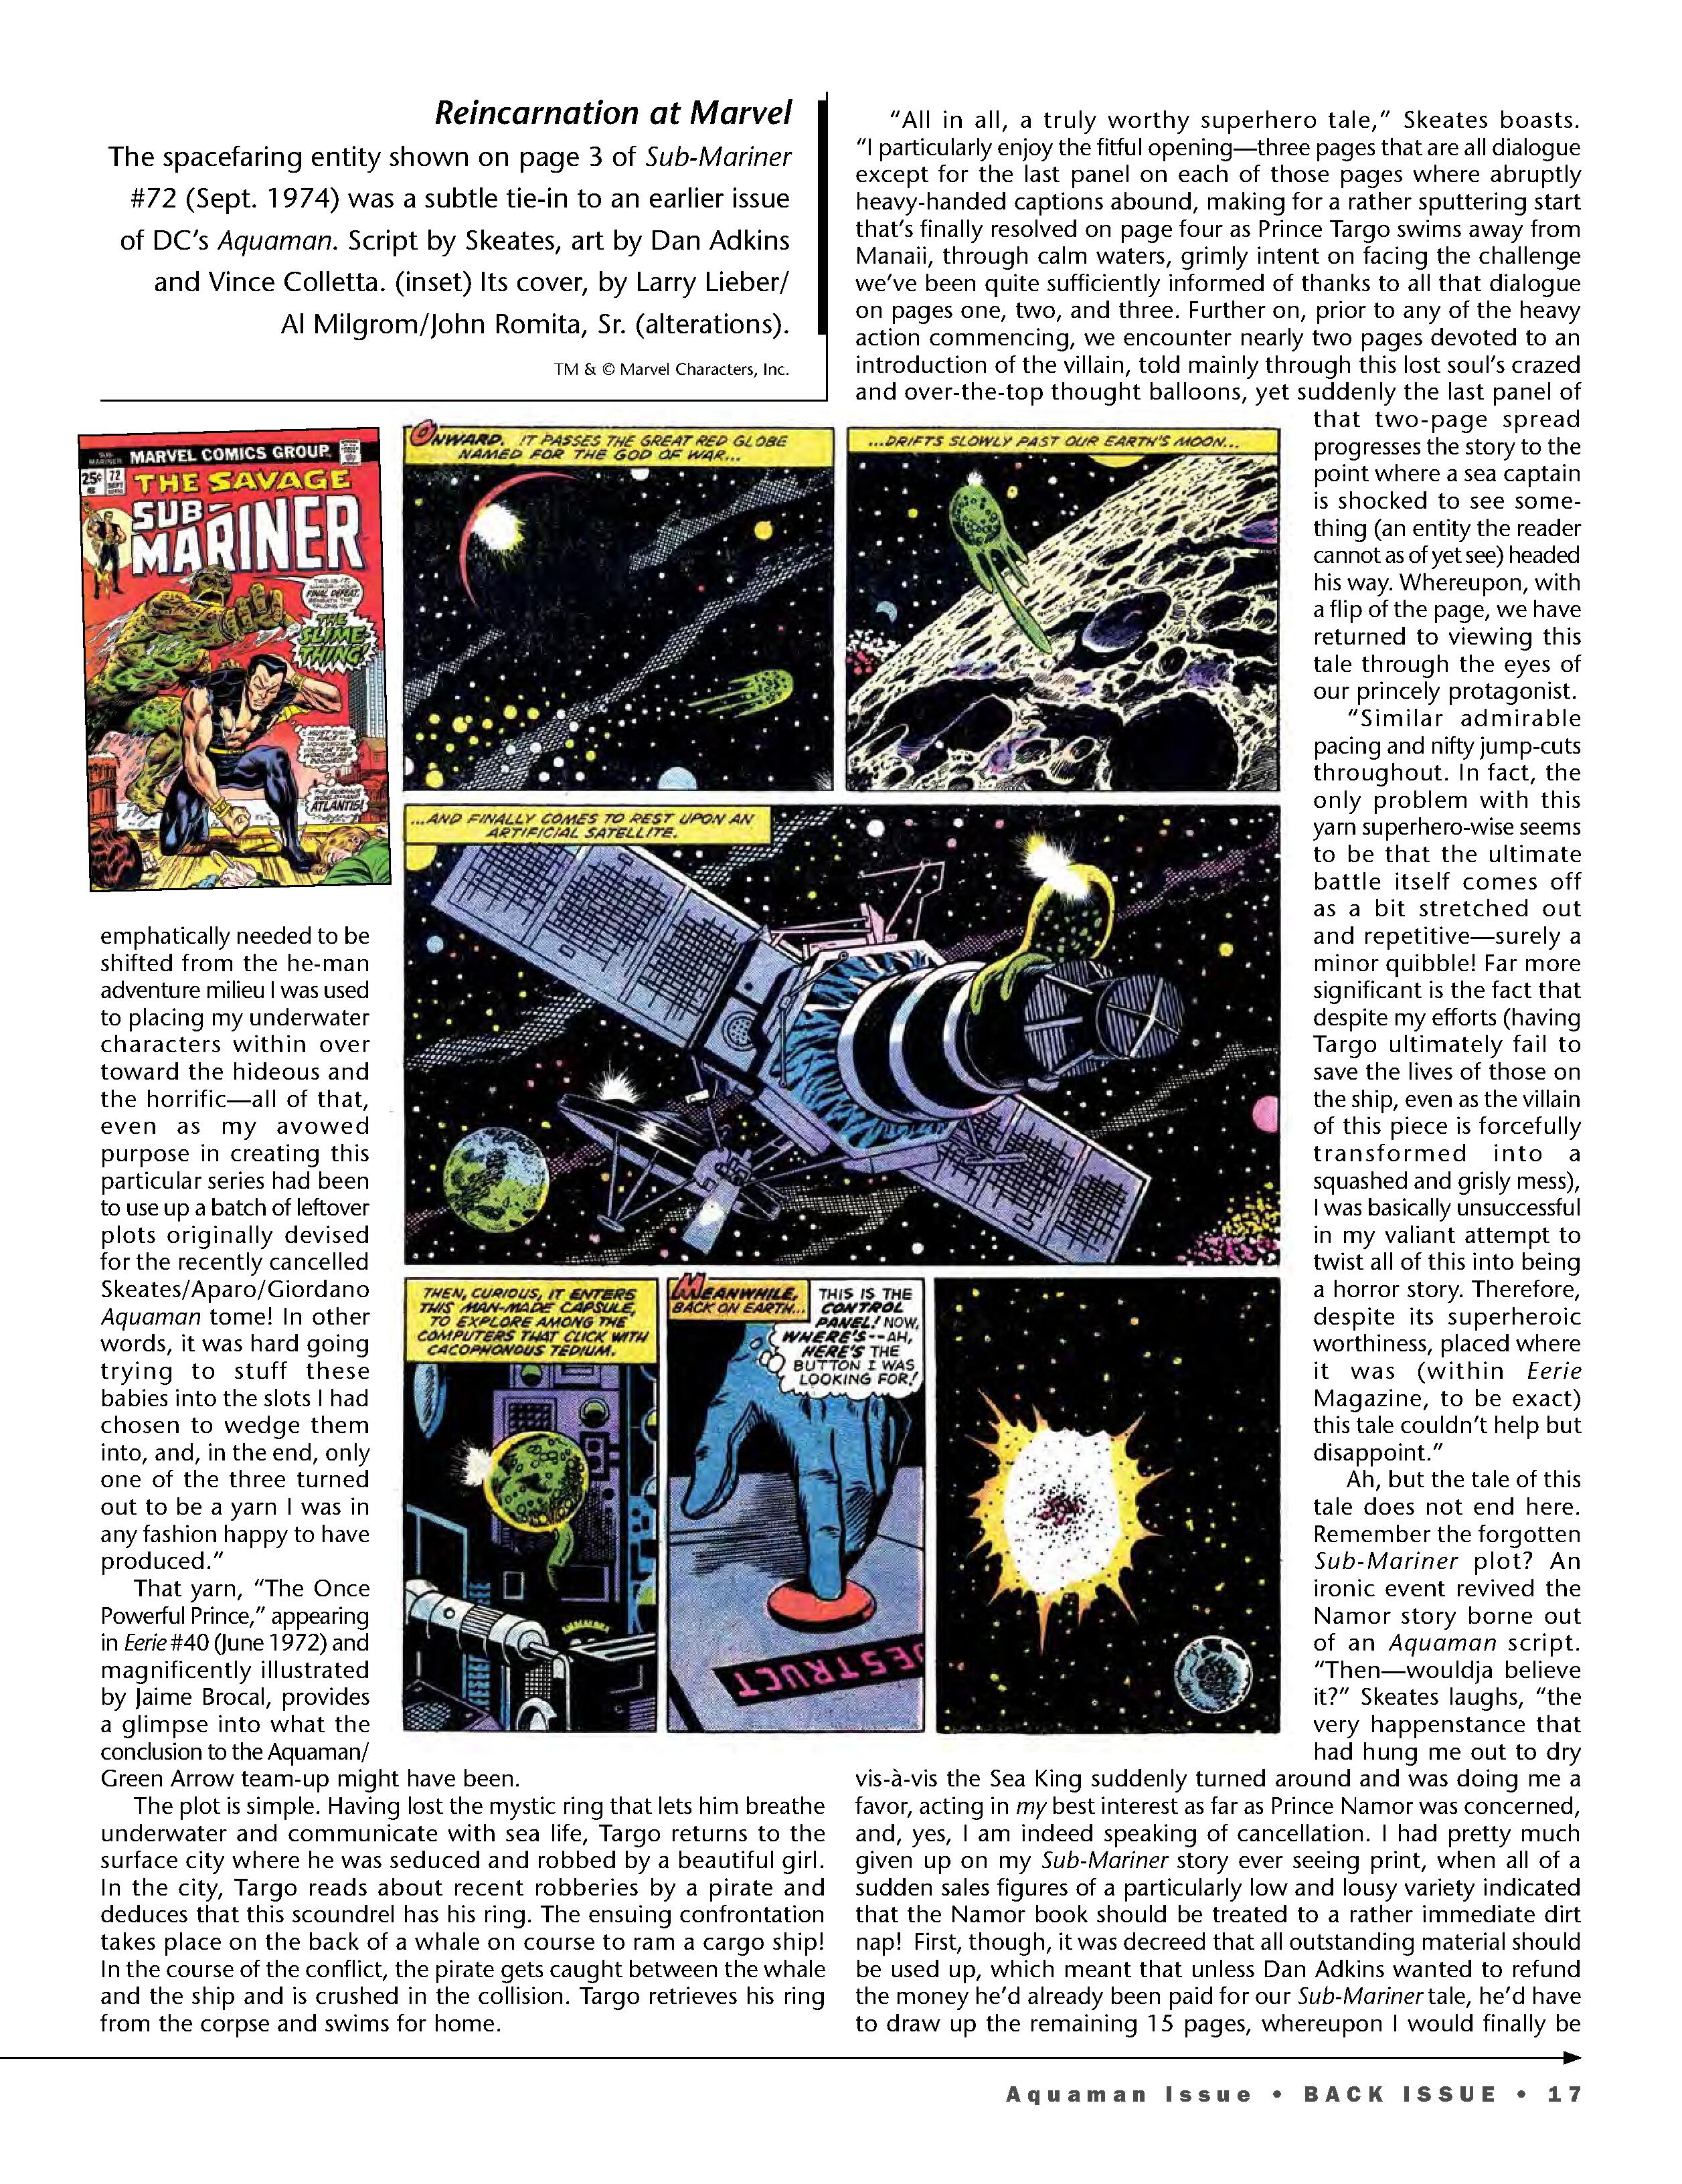 Read online Back Issue comic -  Issue #108 - 19